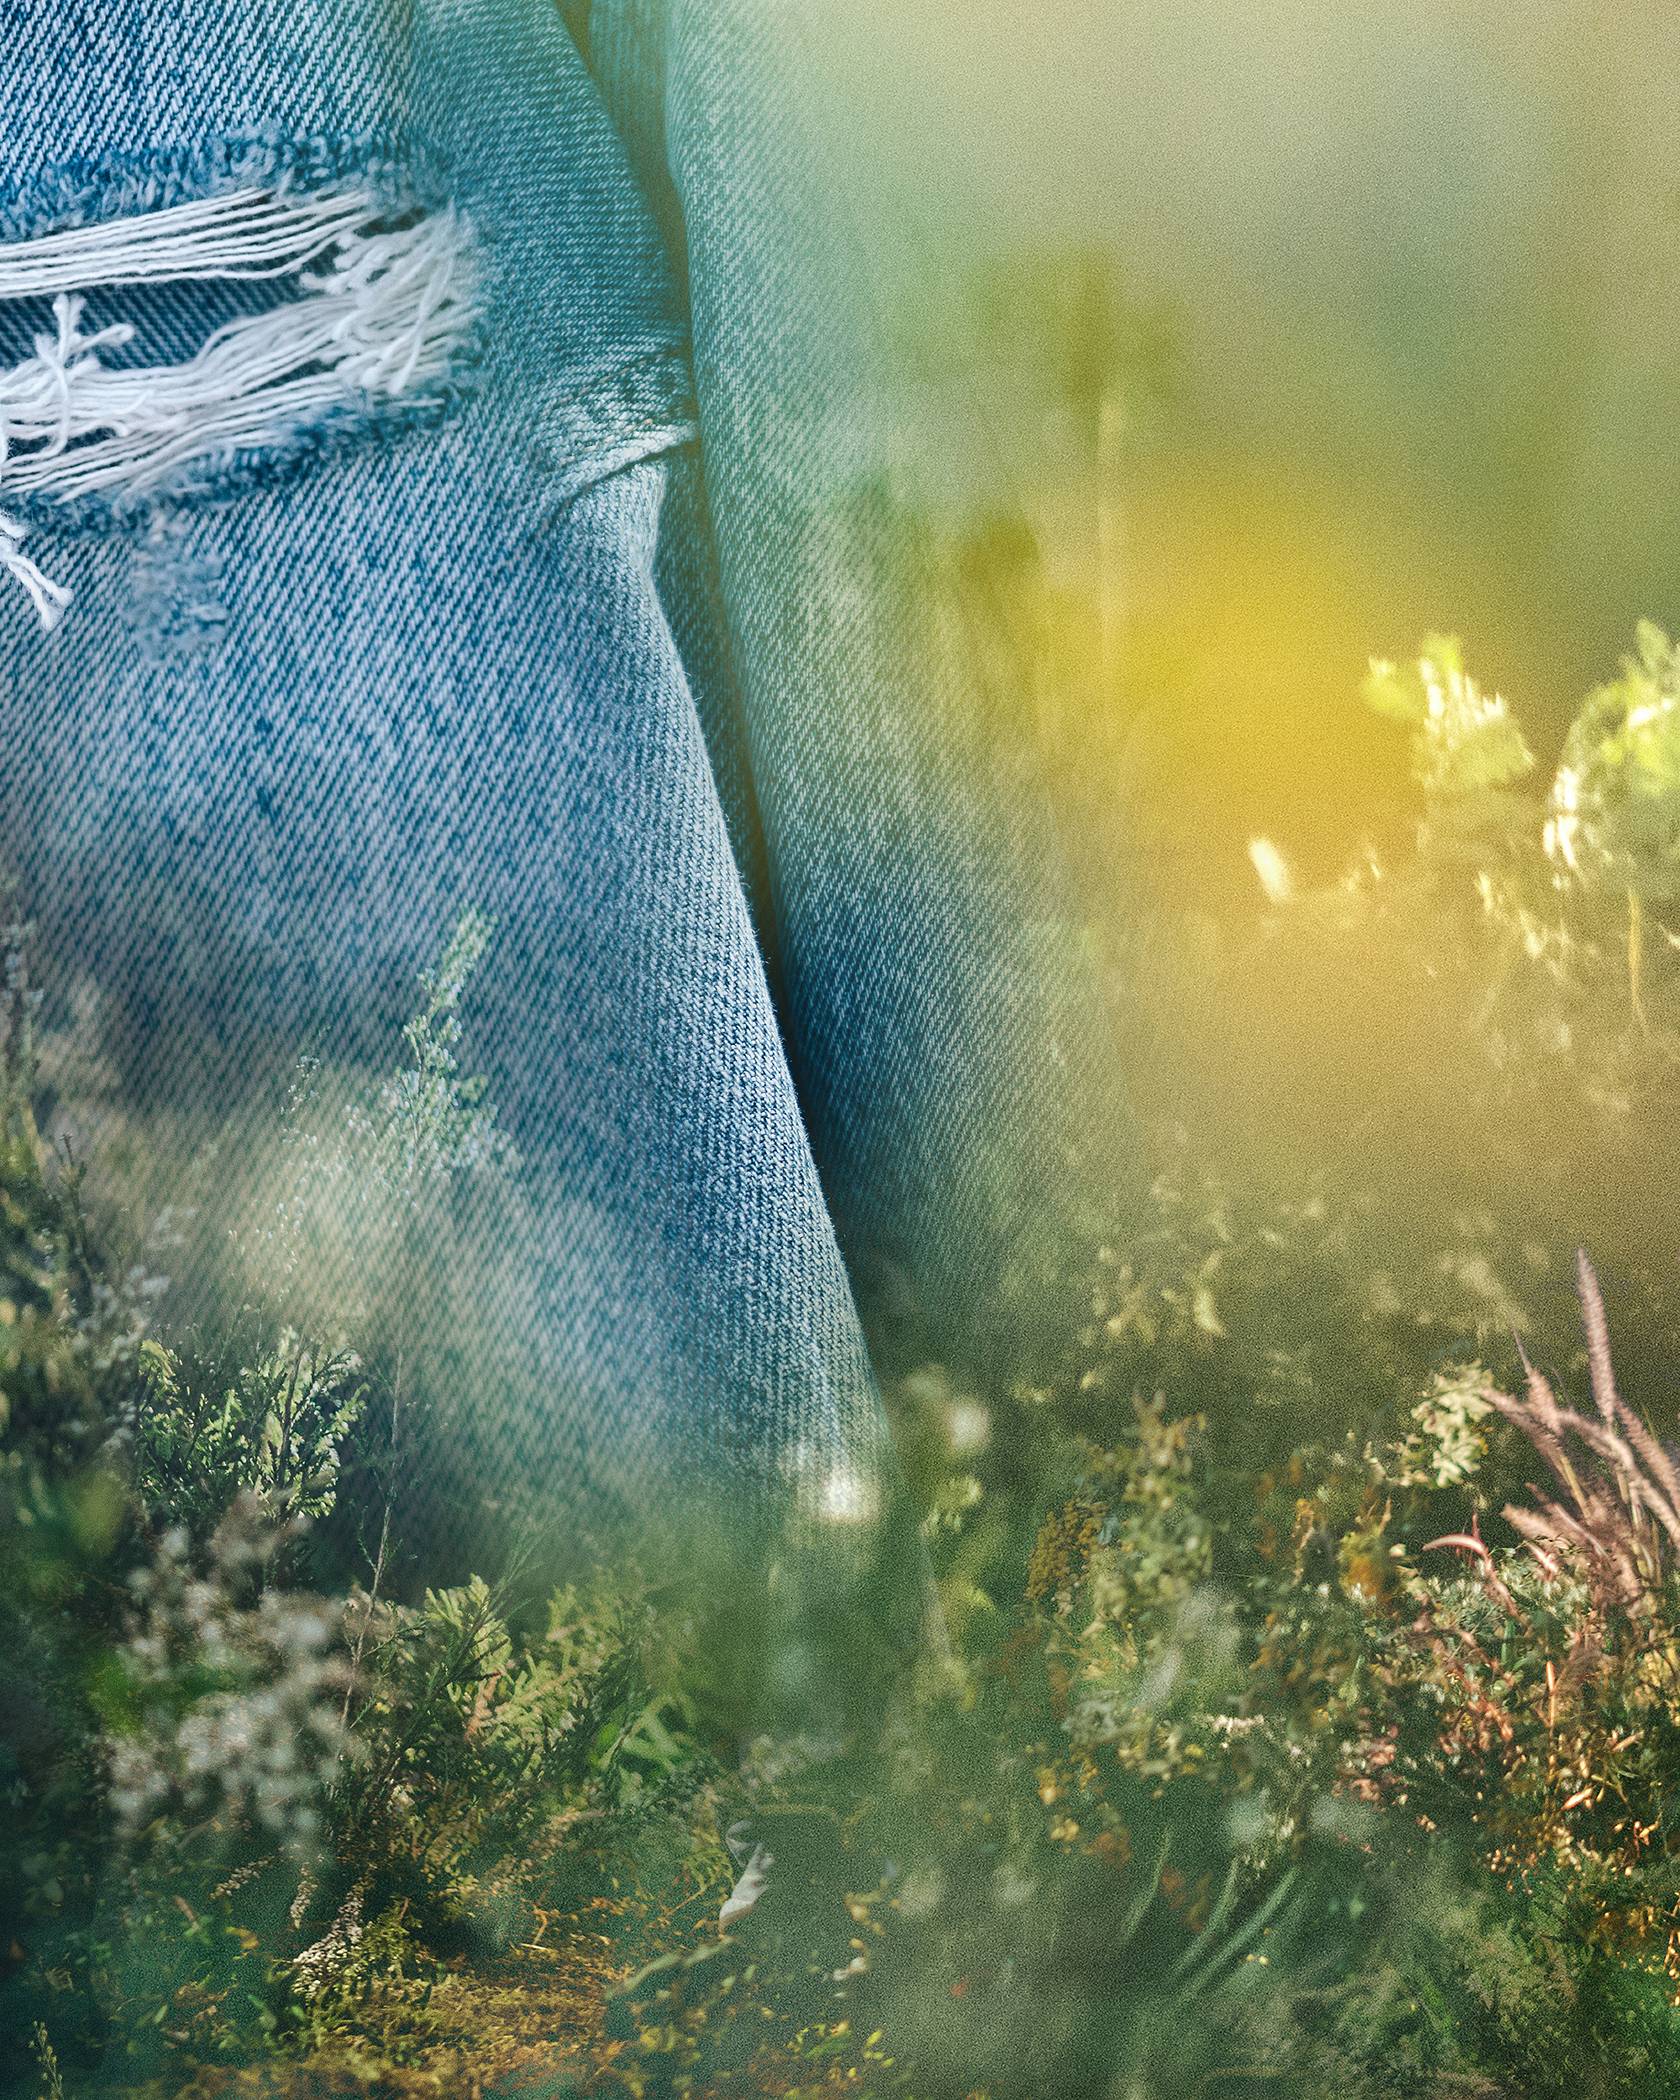 Photo of blue jeans overlaid against an image of grass and flowers.